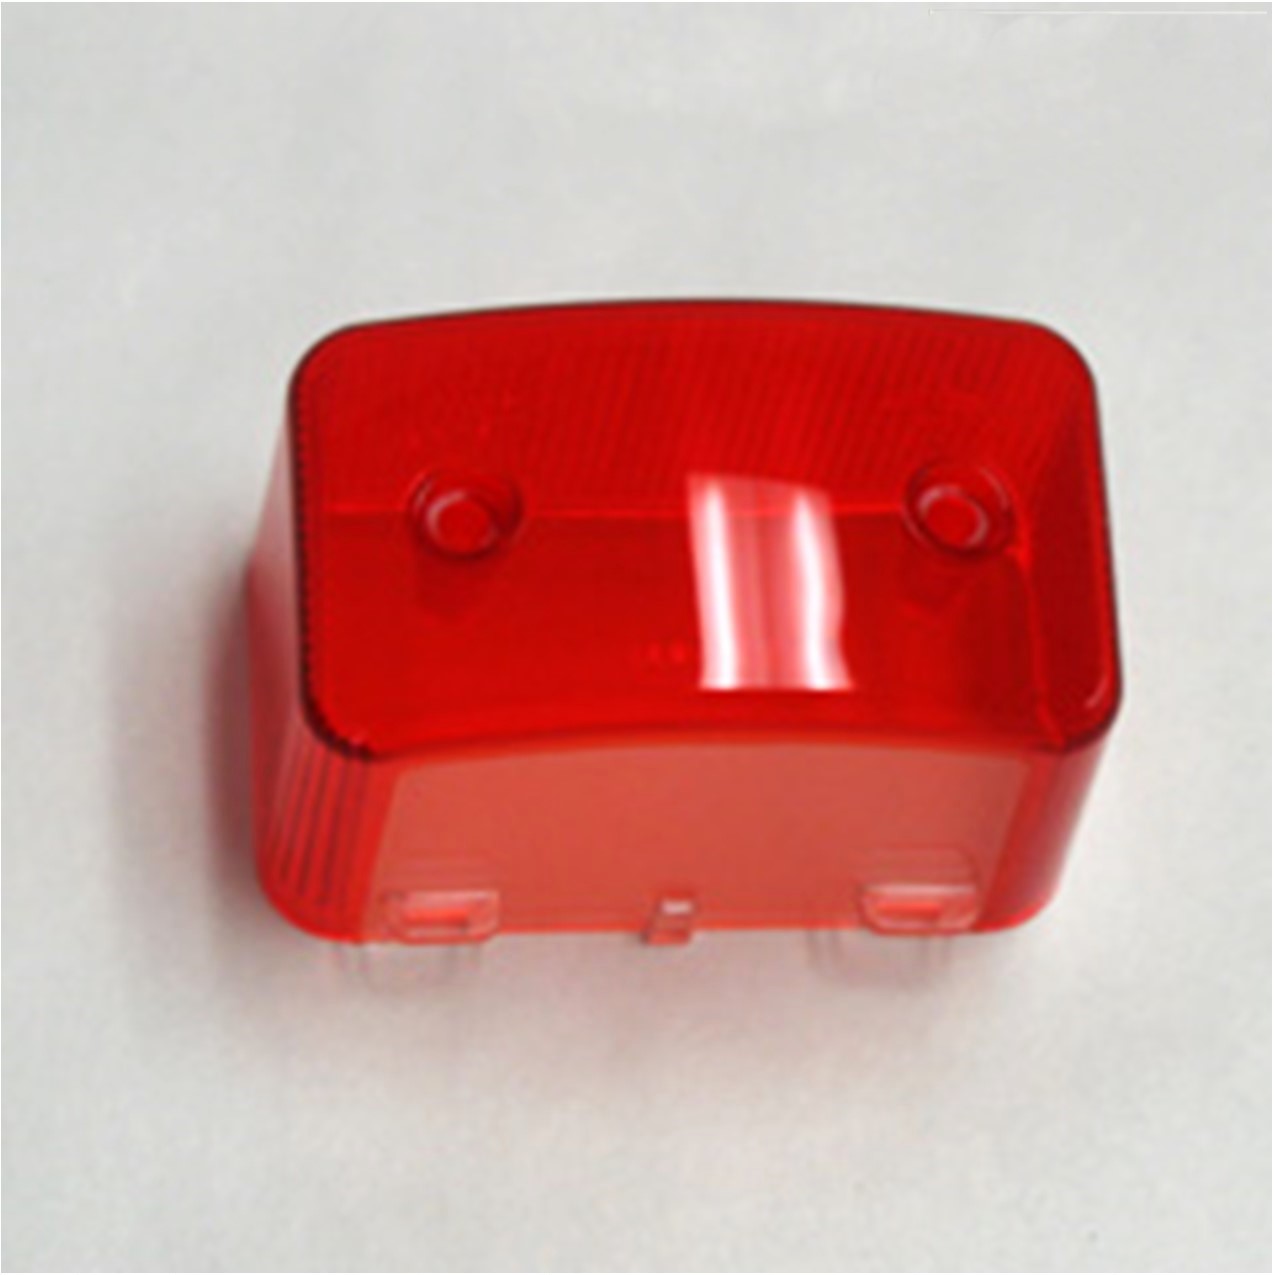 Tail Light Lens 3.5x2.325x2" Bolts c/c=2" Fits E-Ton Rover UK1, Rover GT UK2 - Click Image to Close